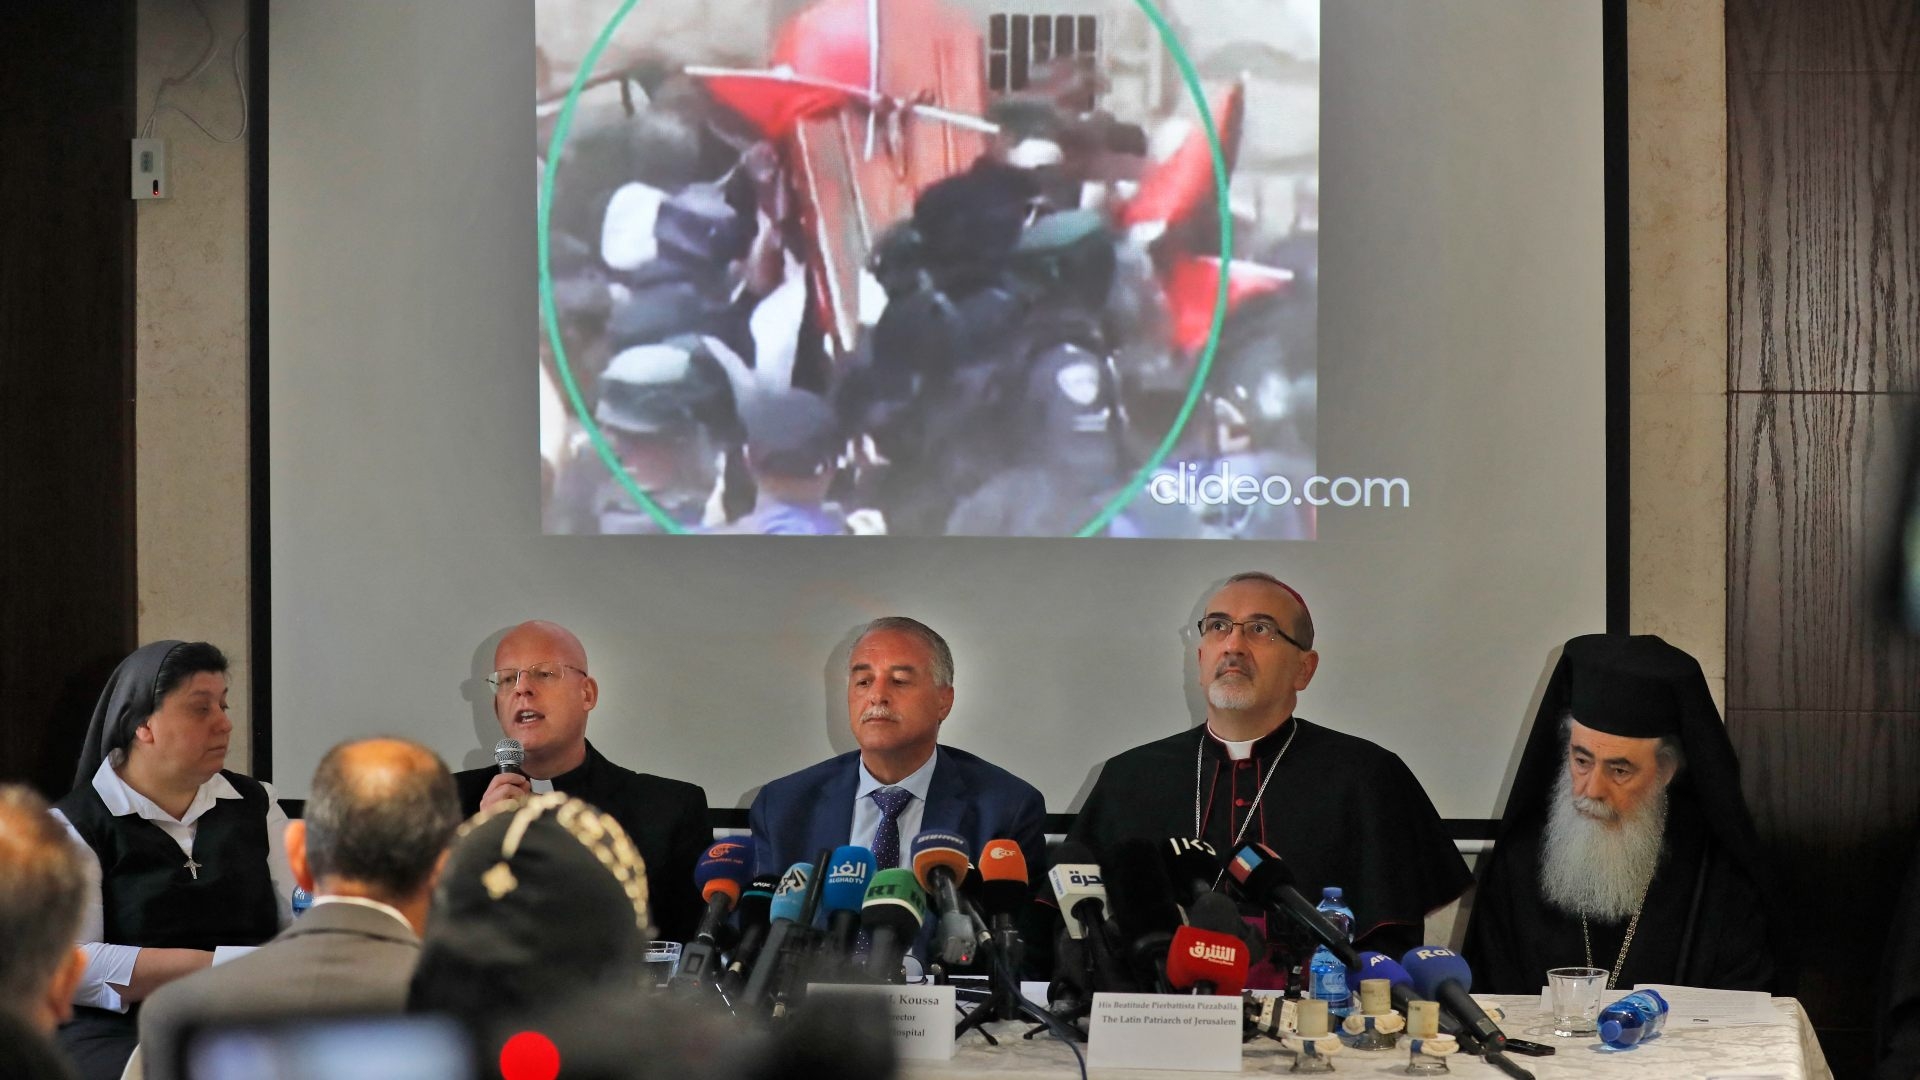 Christian leaders present video footage of scenes in the Saint Joseph's Hospital prior to Abu Akleh's funeral procession during a press conference in Jerusalem on 16 May 2022.